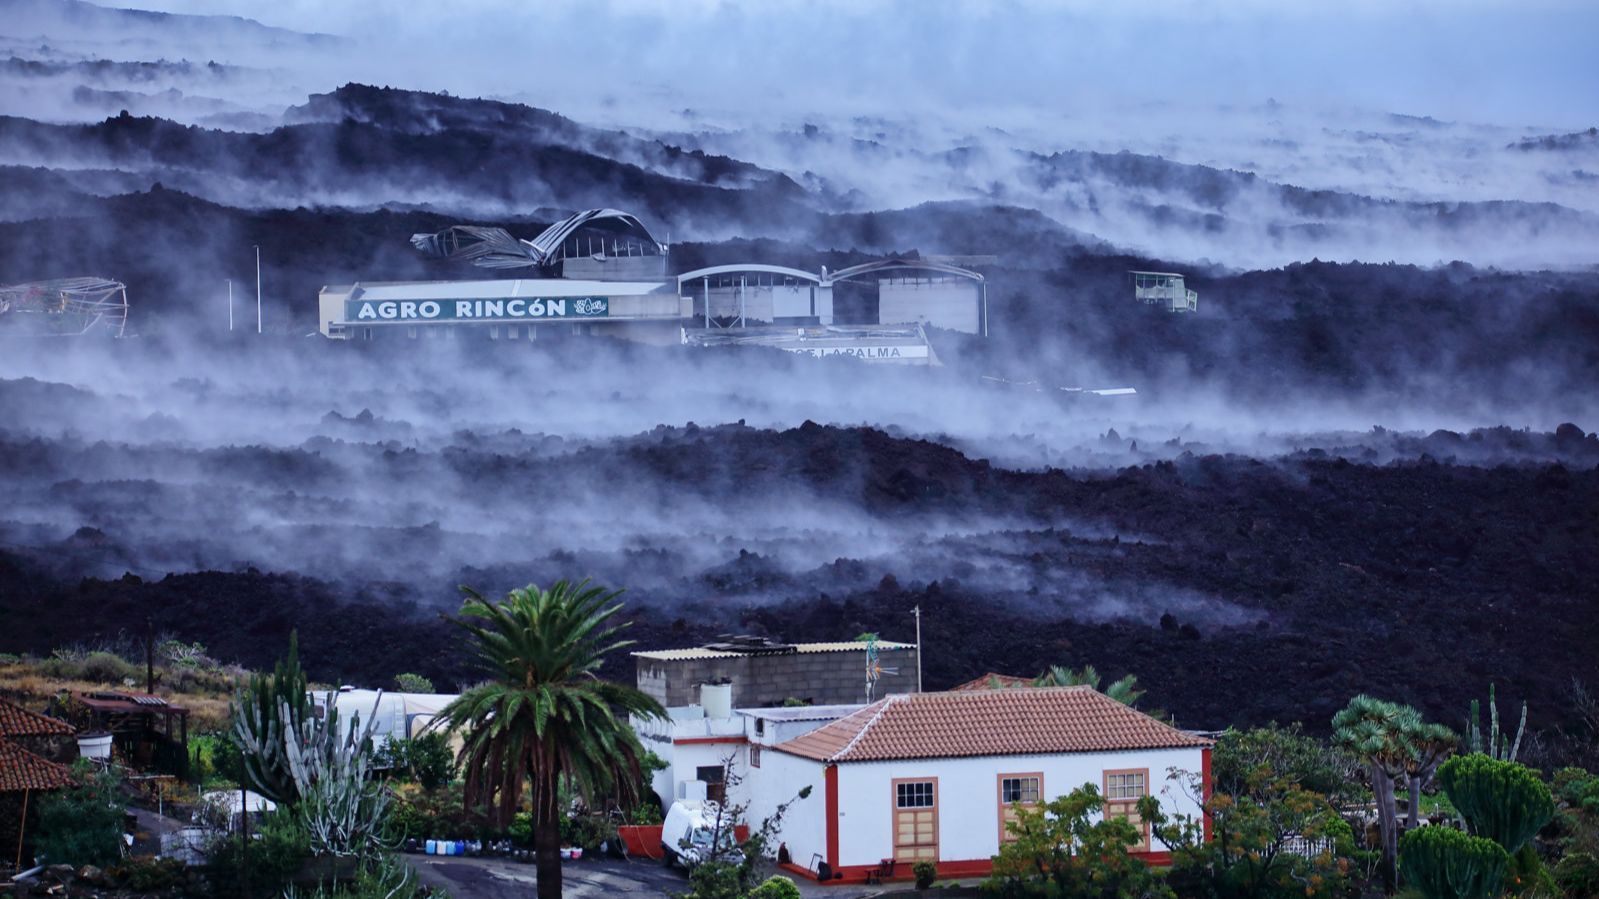 The rationalization for the hanging picture of La Palma after the rains: ‘clouds’ of water vapor over the laundry